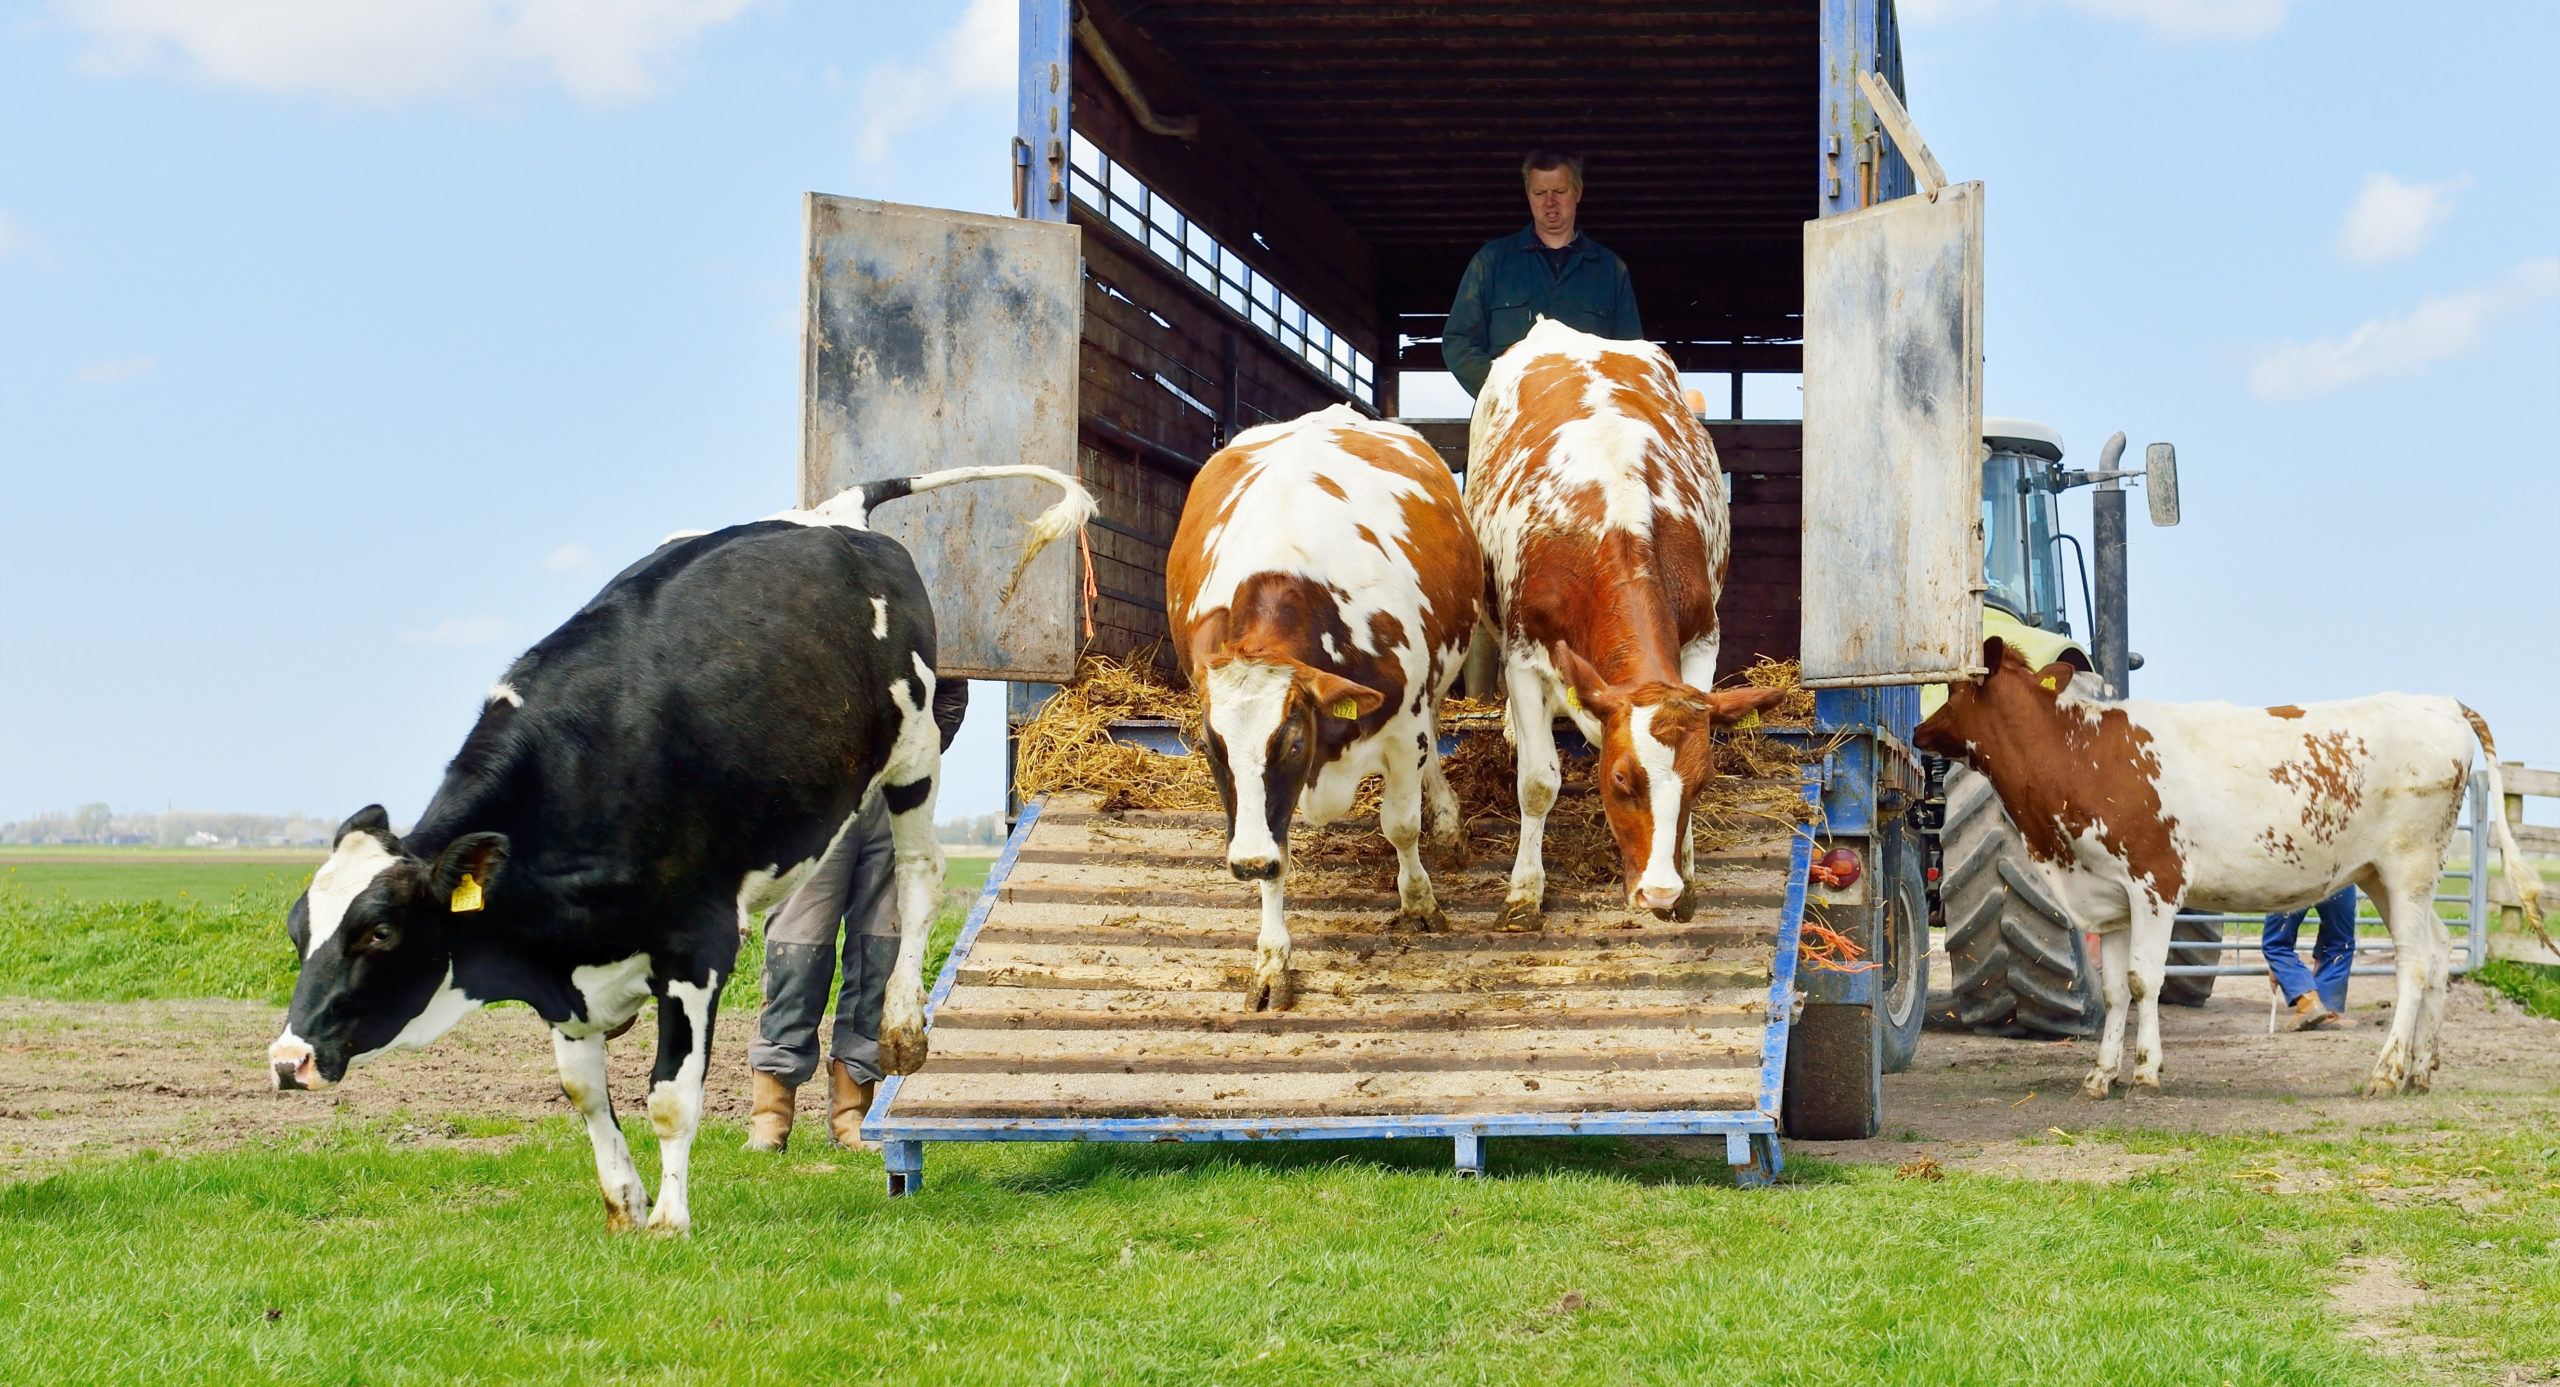 catlle of cows jumping out of transport truck in meadow